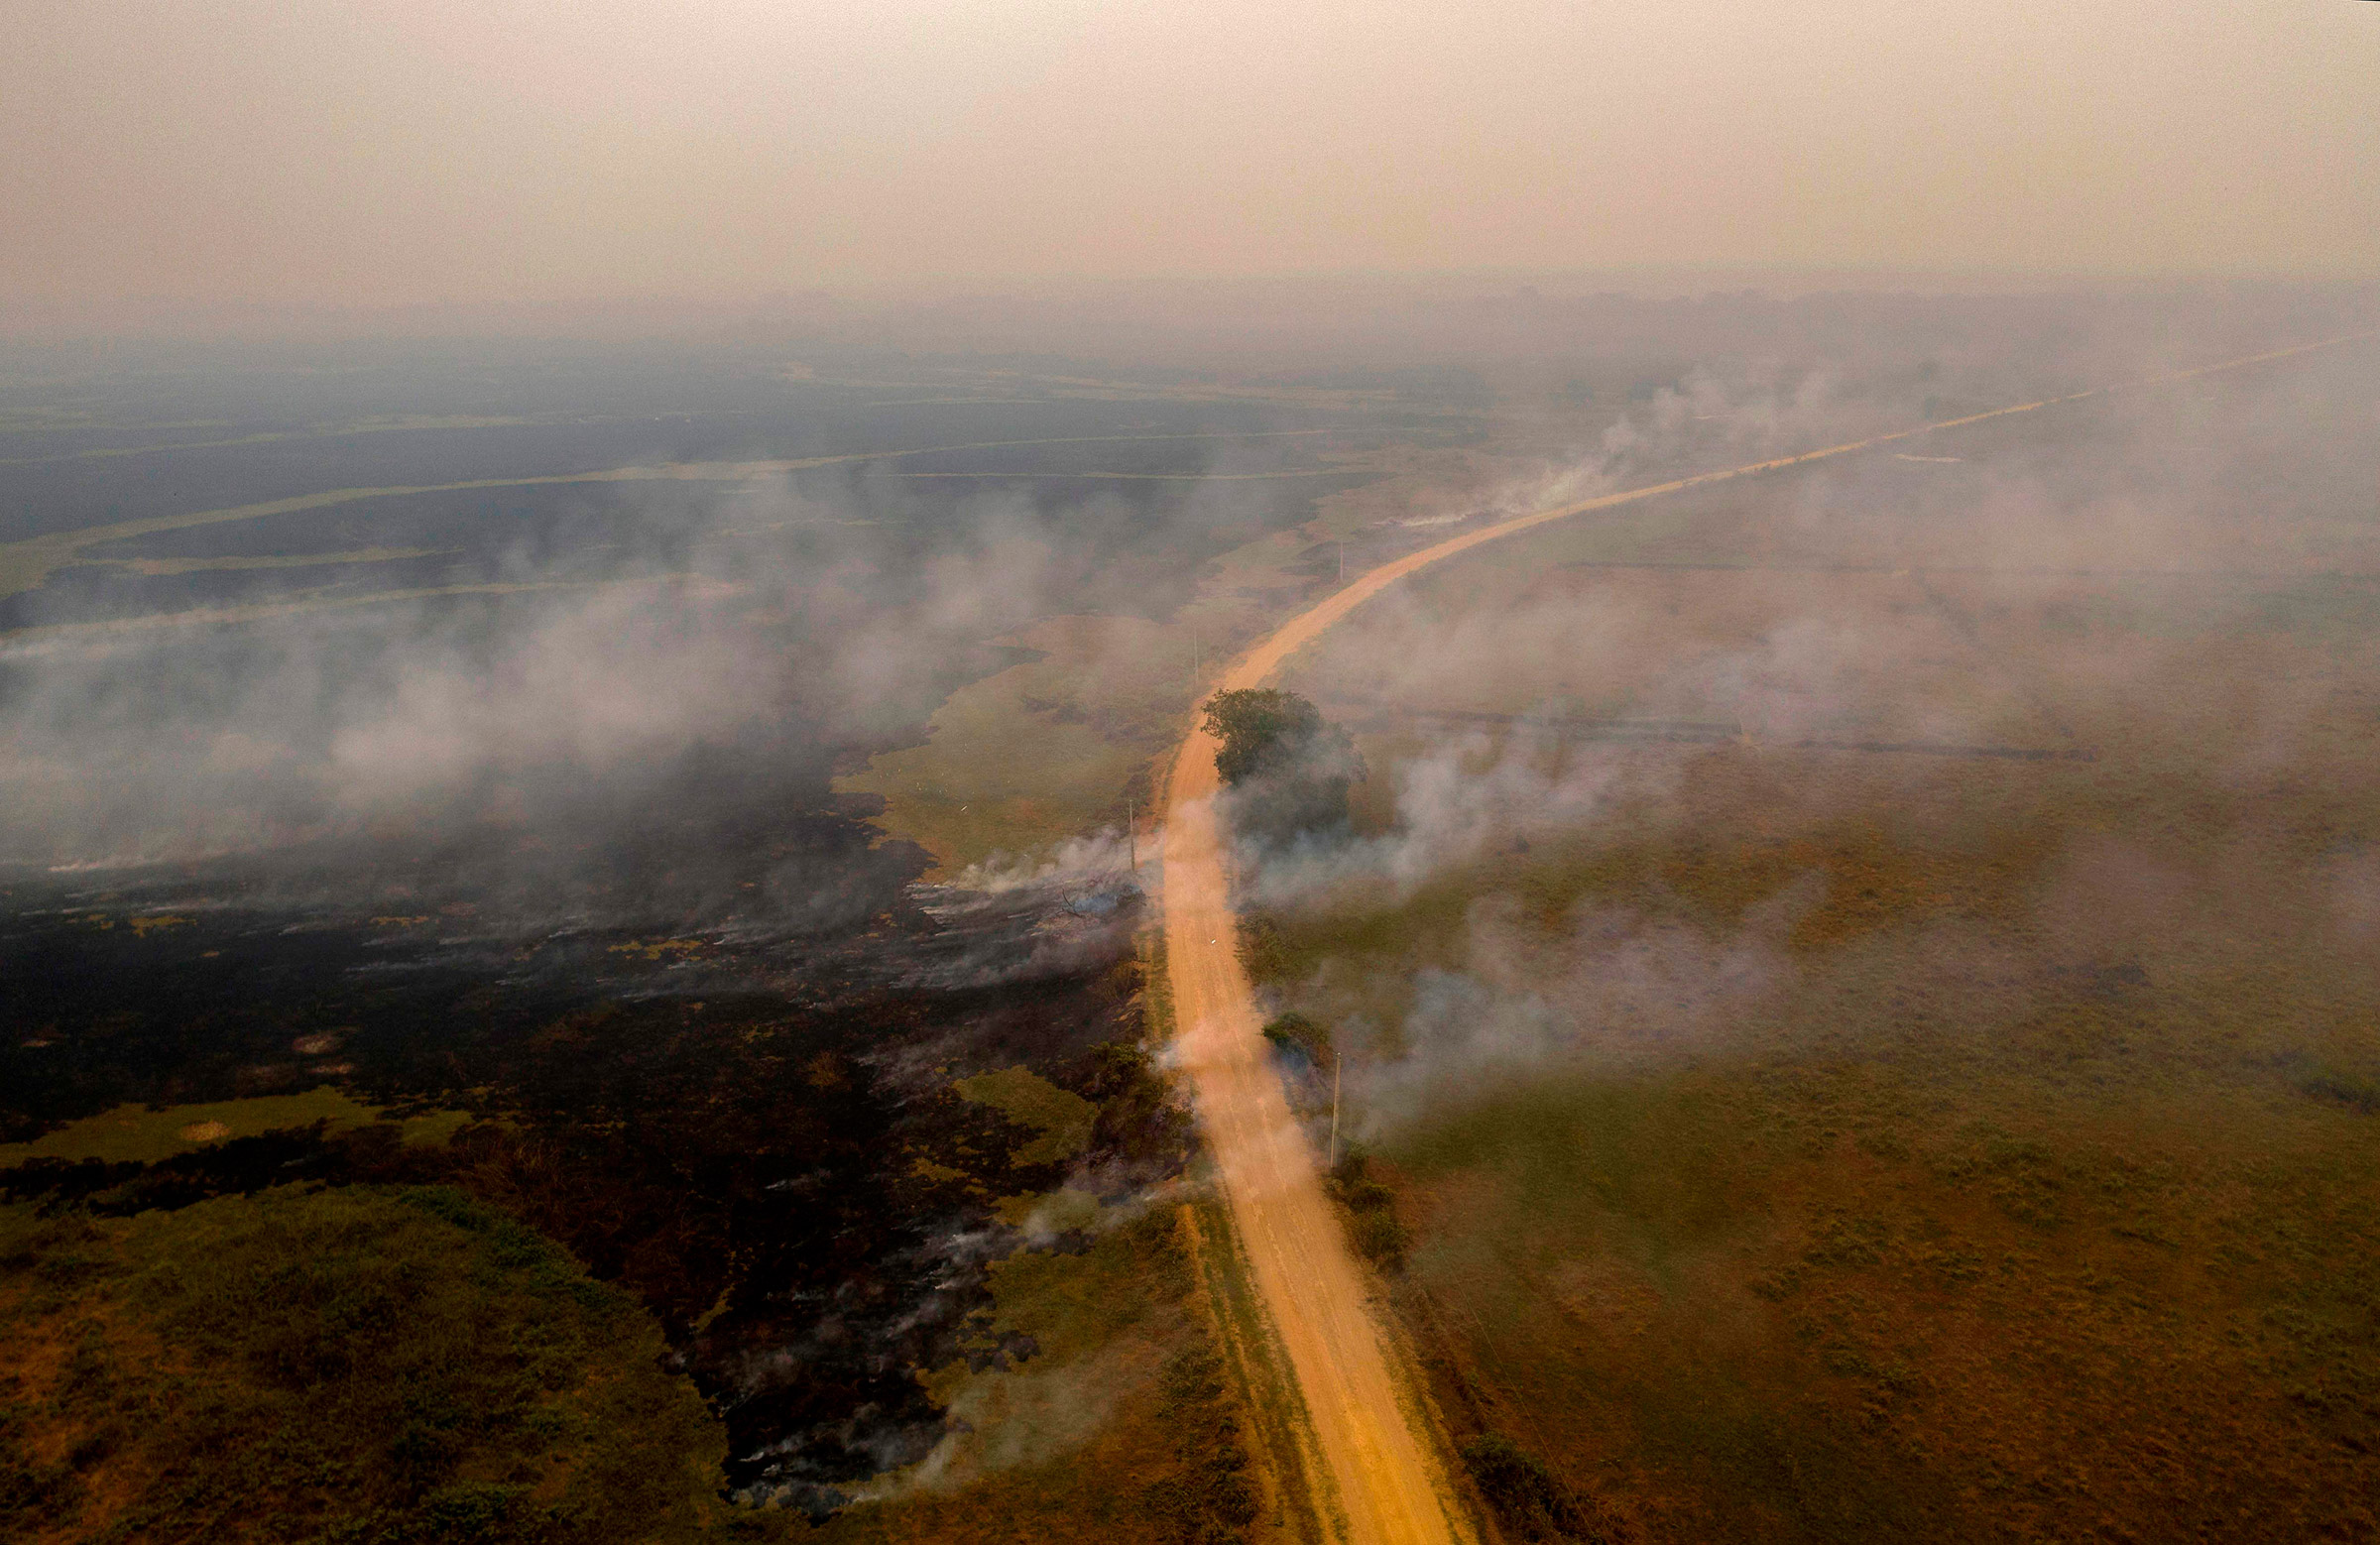 Smoke billows from fires near the Transpantaneira road on Sept. 14. (Mauro Pimentel—AFP/Getty Images)